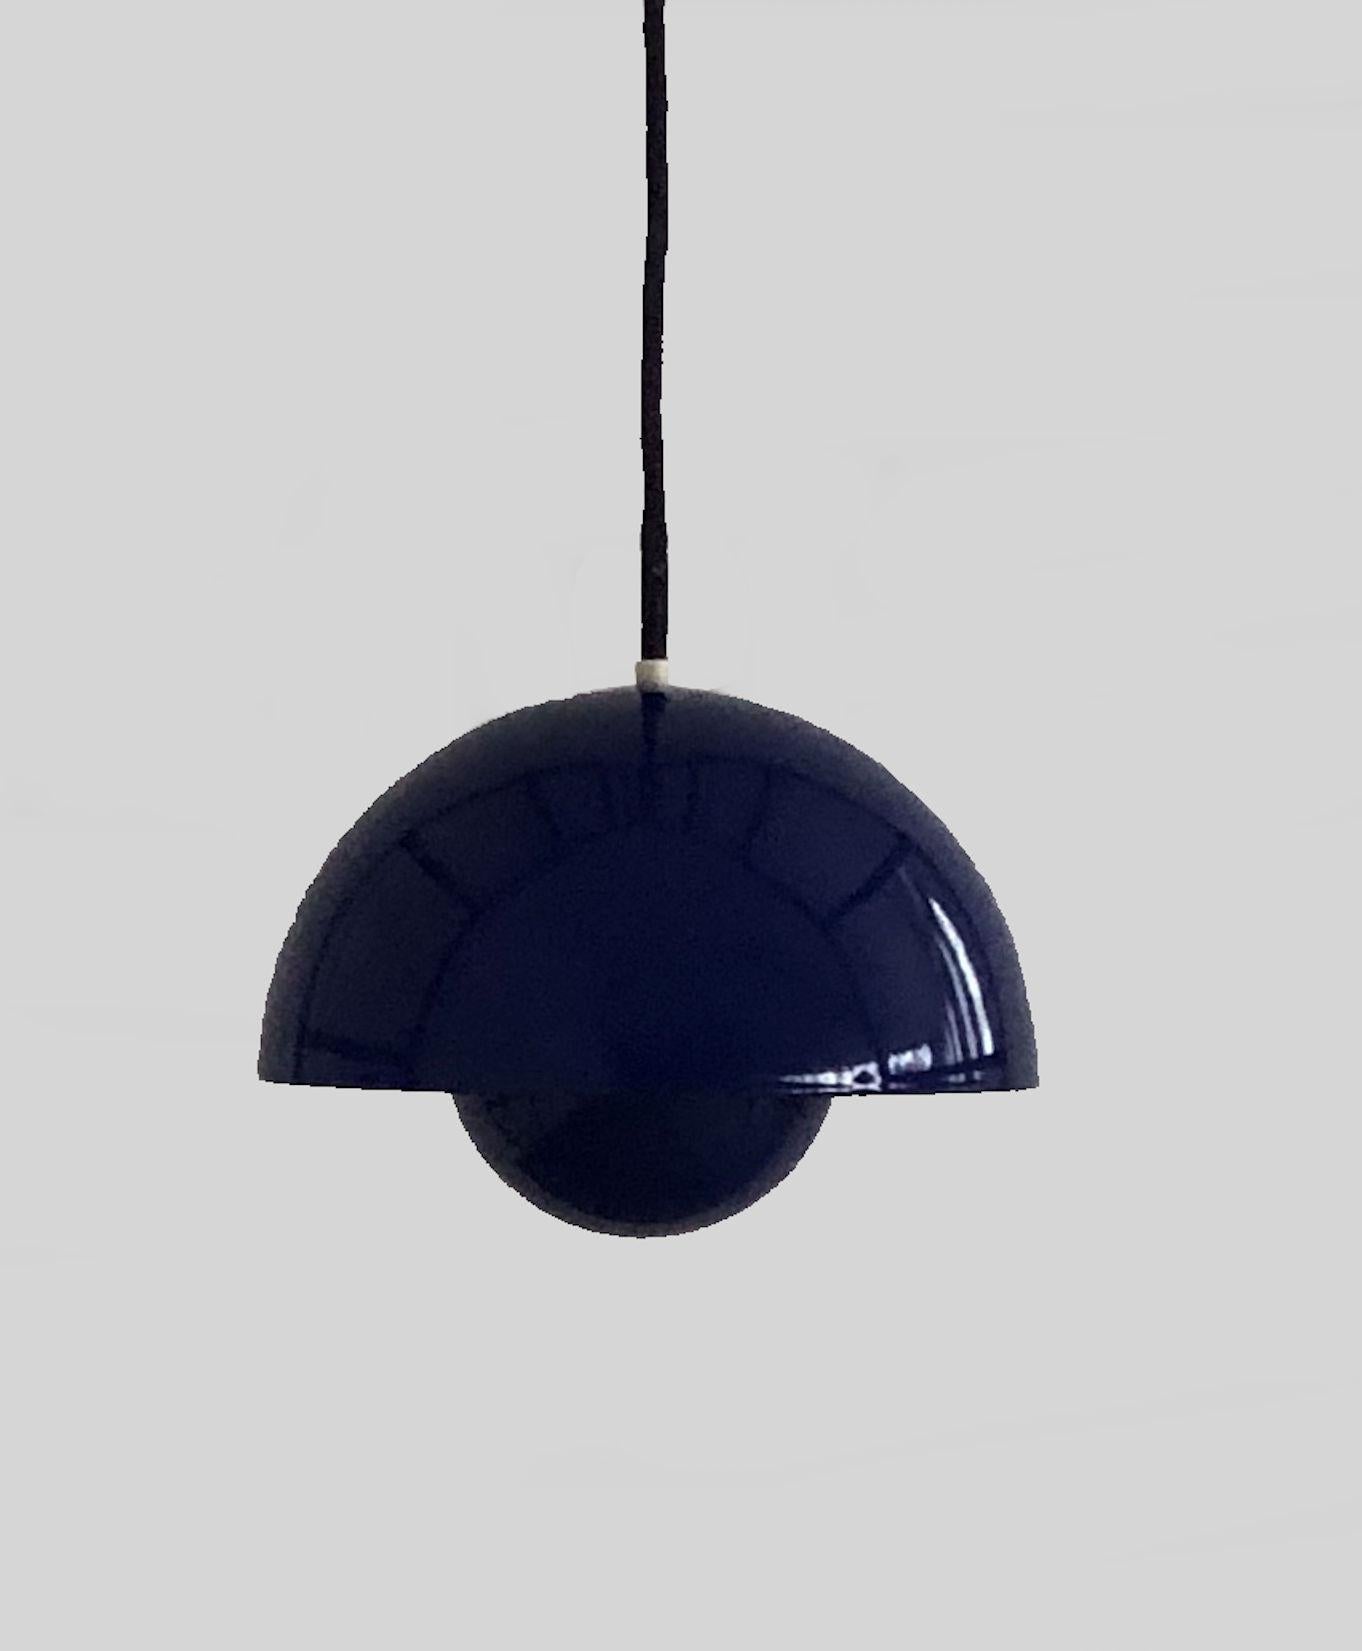 Verner Panton 1´st. edition blue flowerpot pendant light designed for Louis Poulsen in 1969.

The pendant is the pendant is the 1´st. edition in enamel and feature a blue enamel lampshade consisting of two semi-circular spheres facing each other.